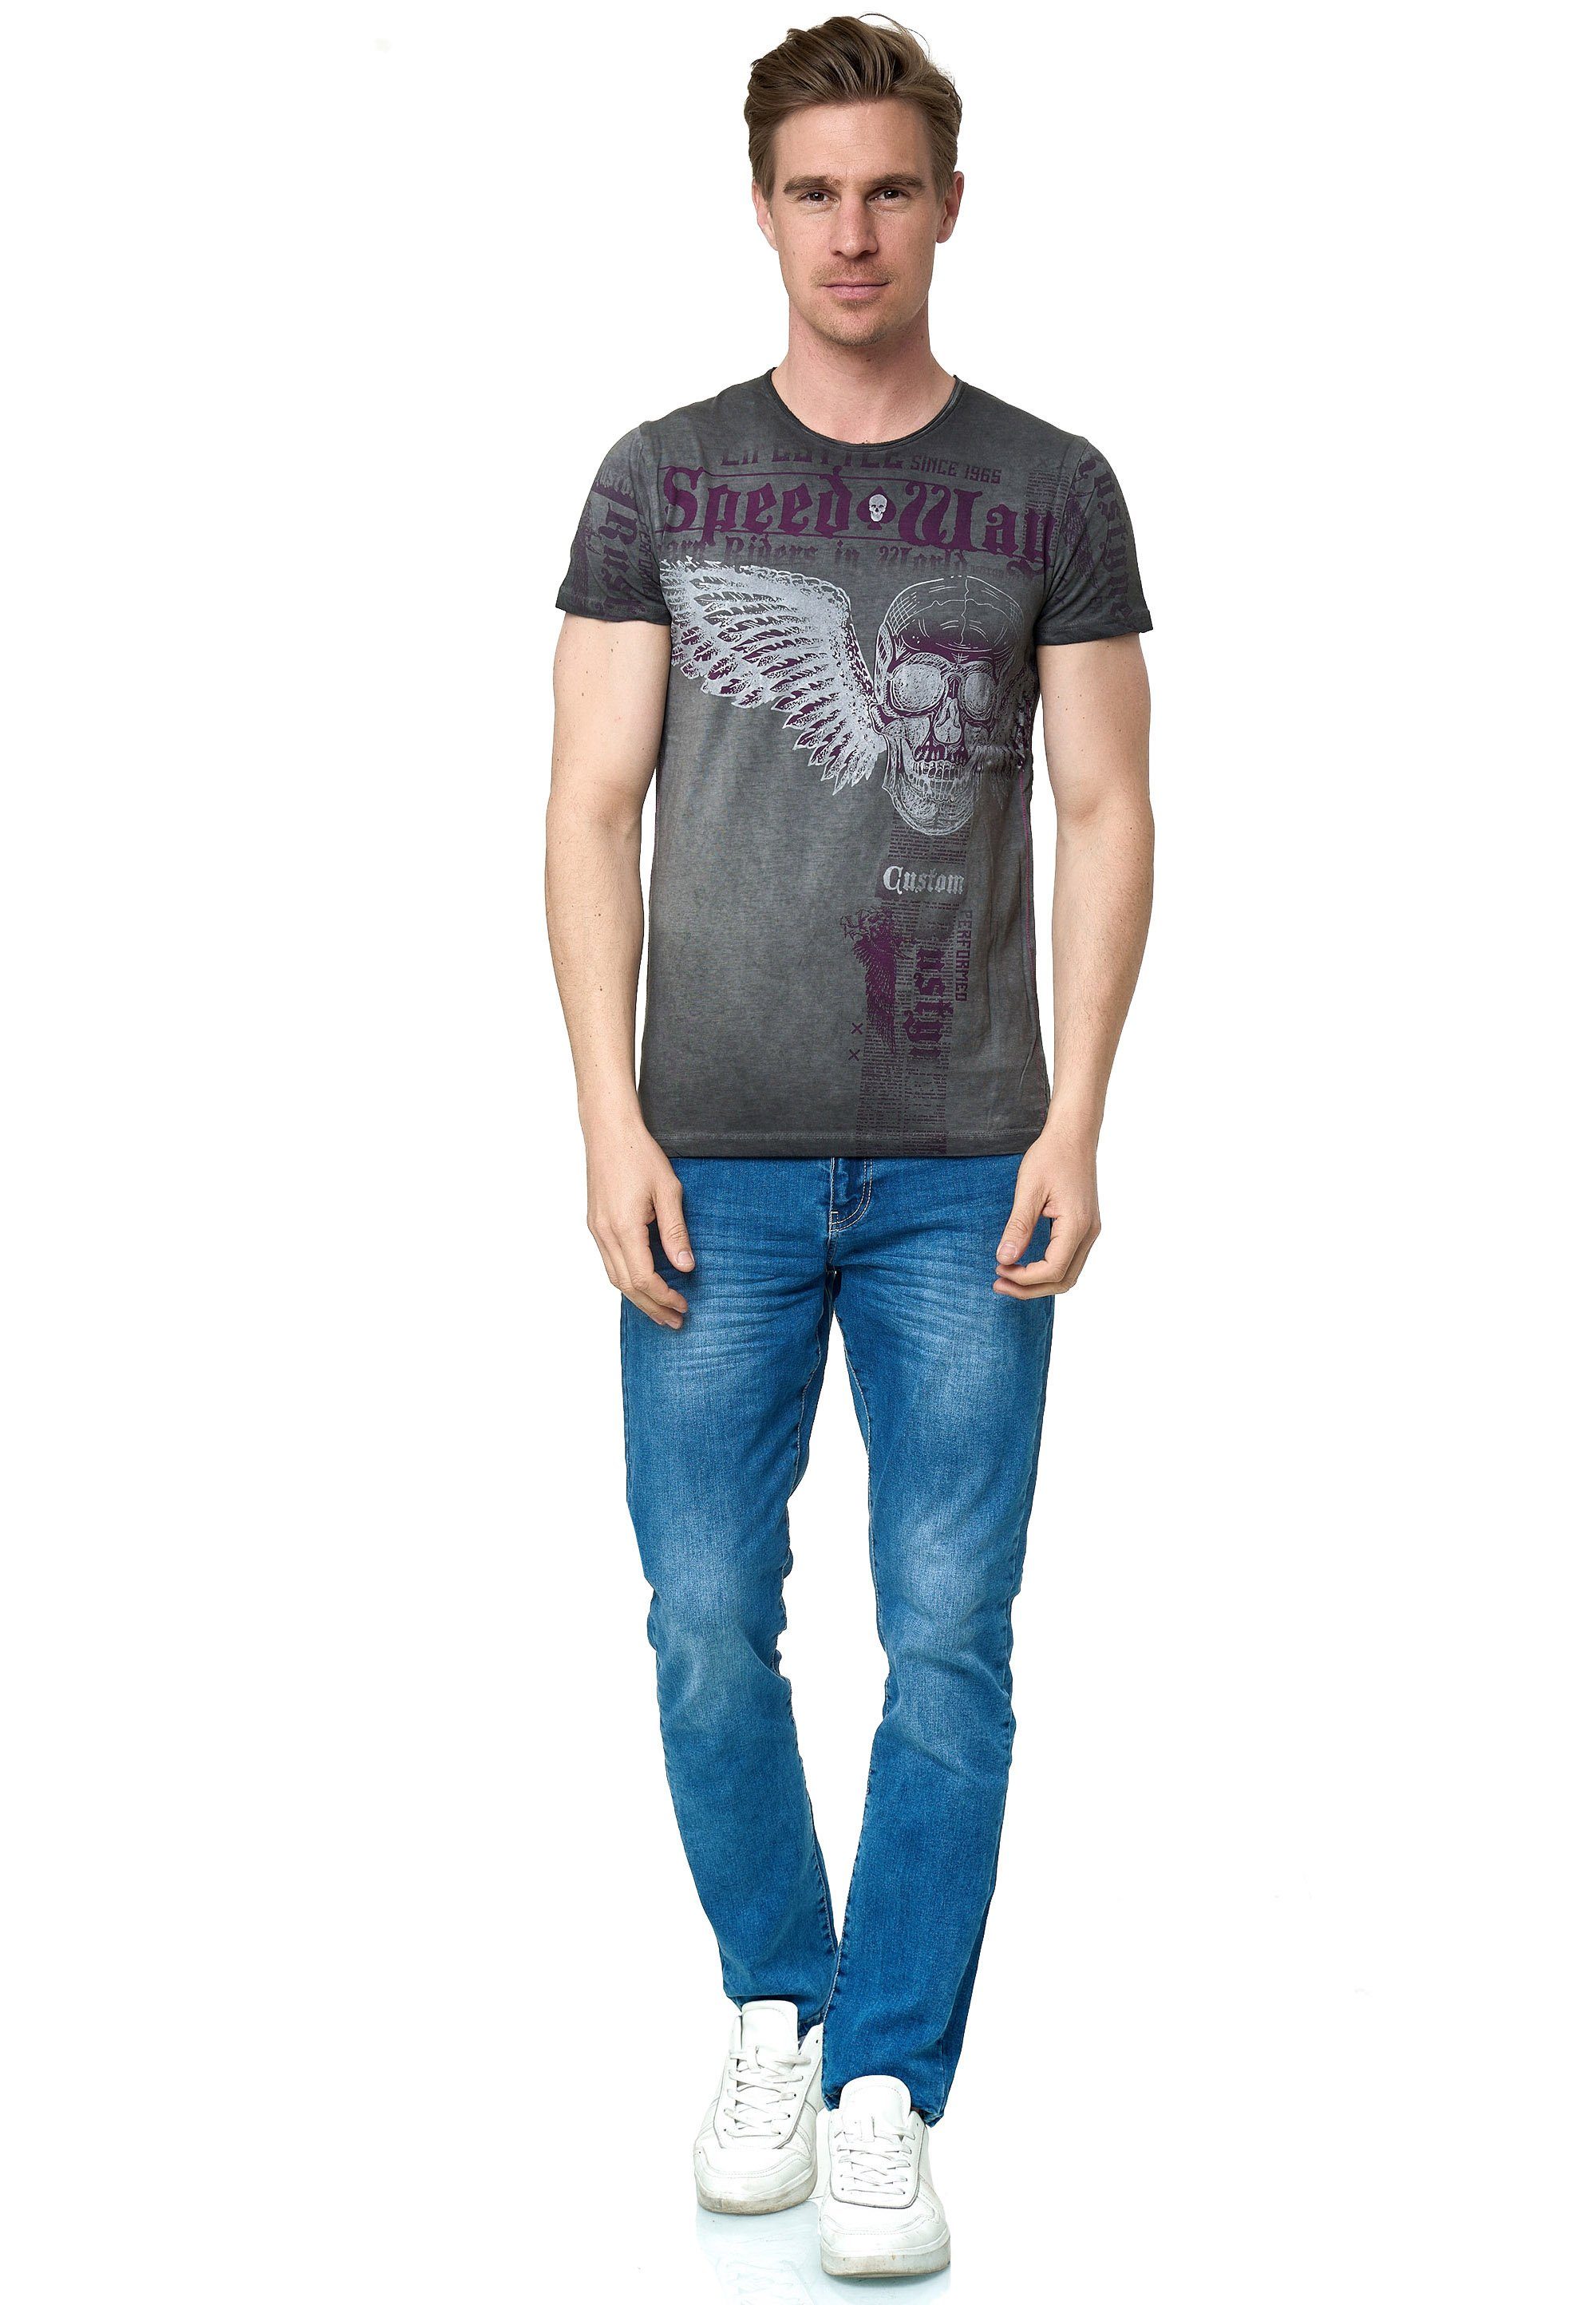 Neal coolem mit Rusty anthrazit T-Shirt Allover-Print